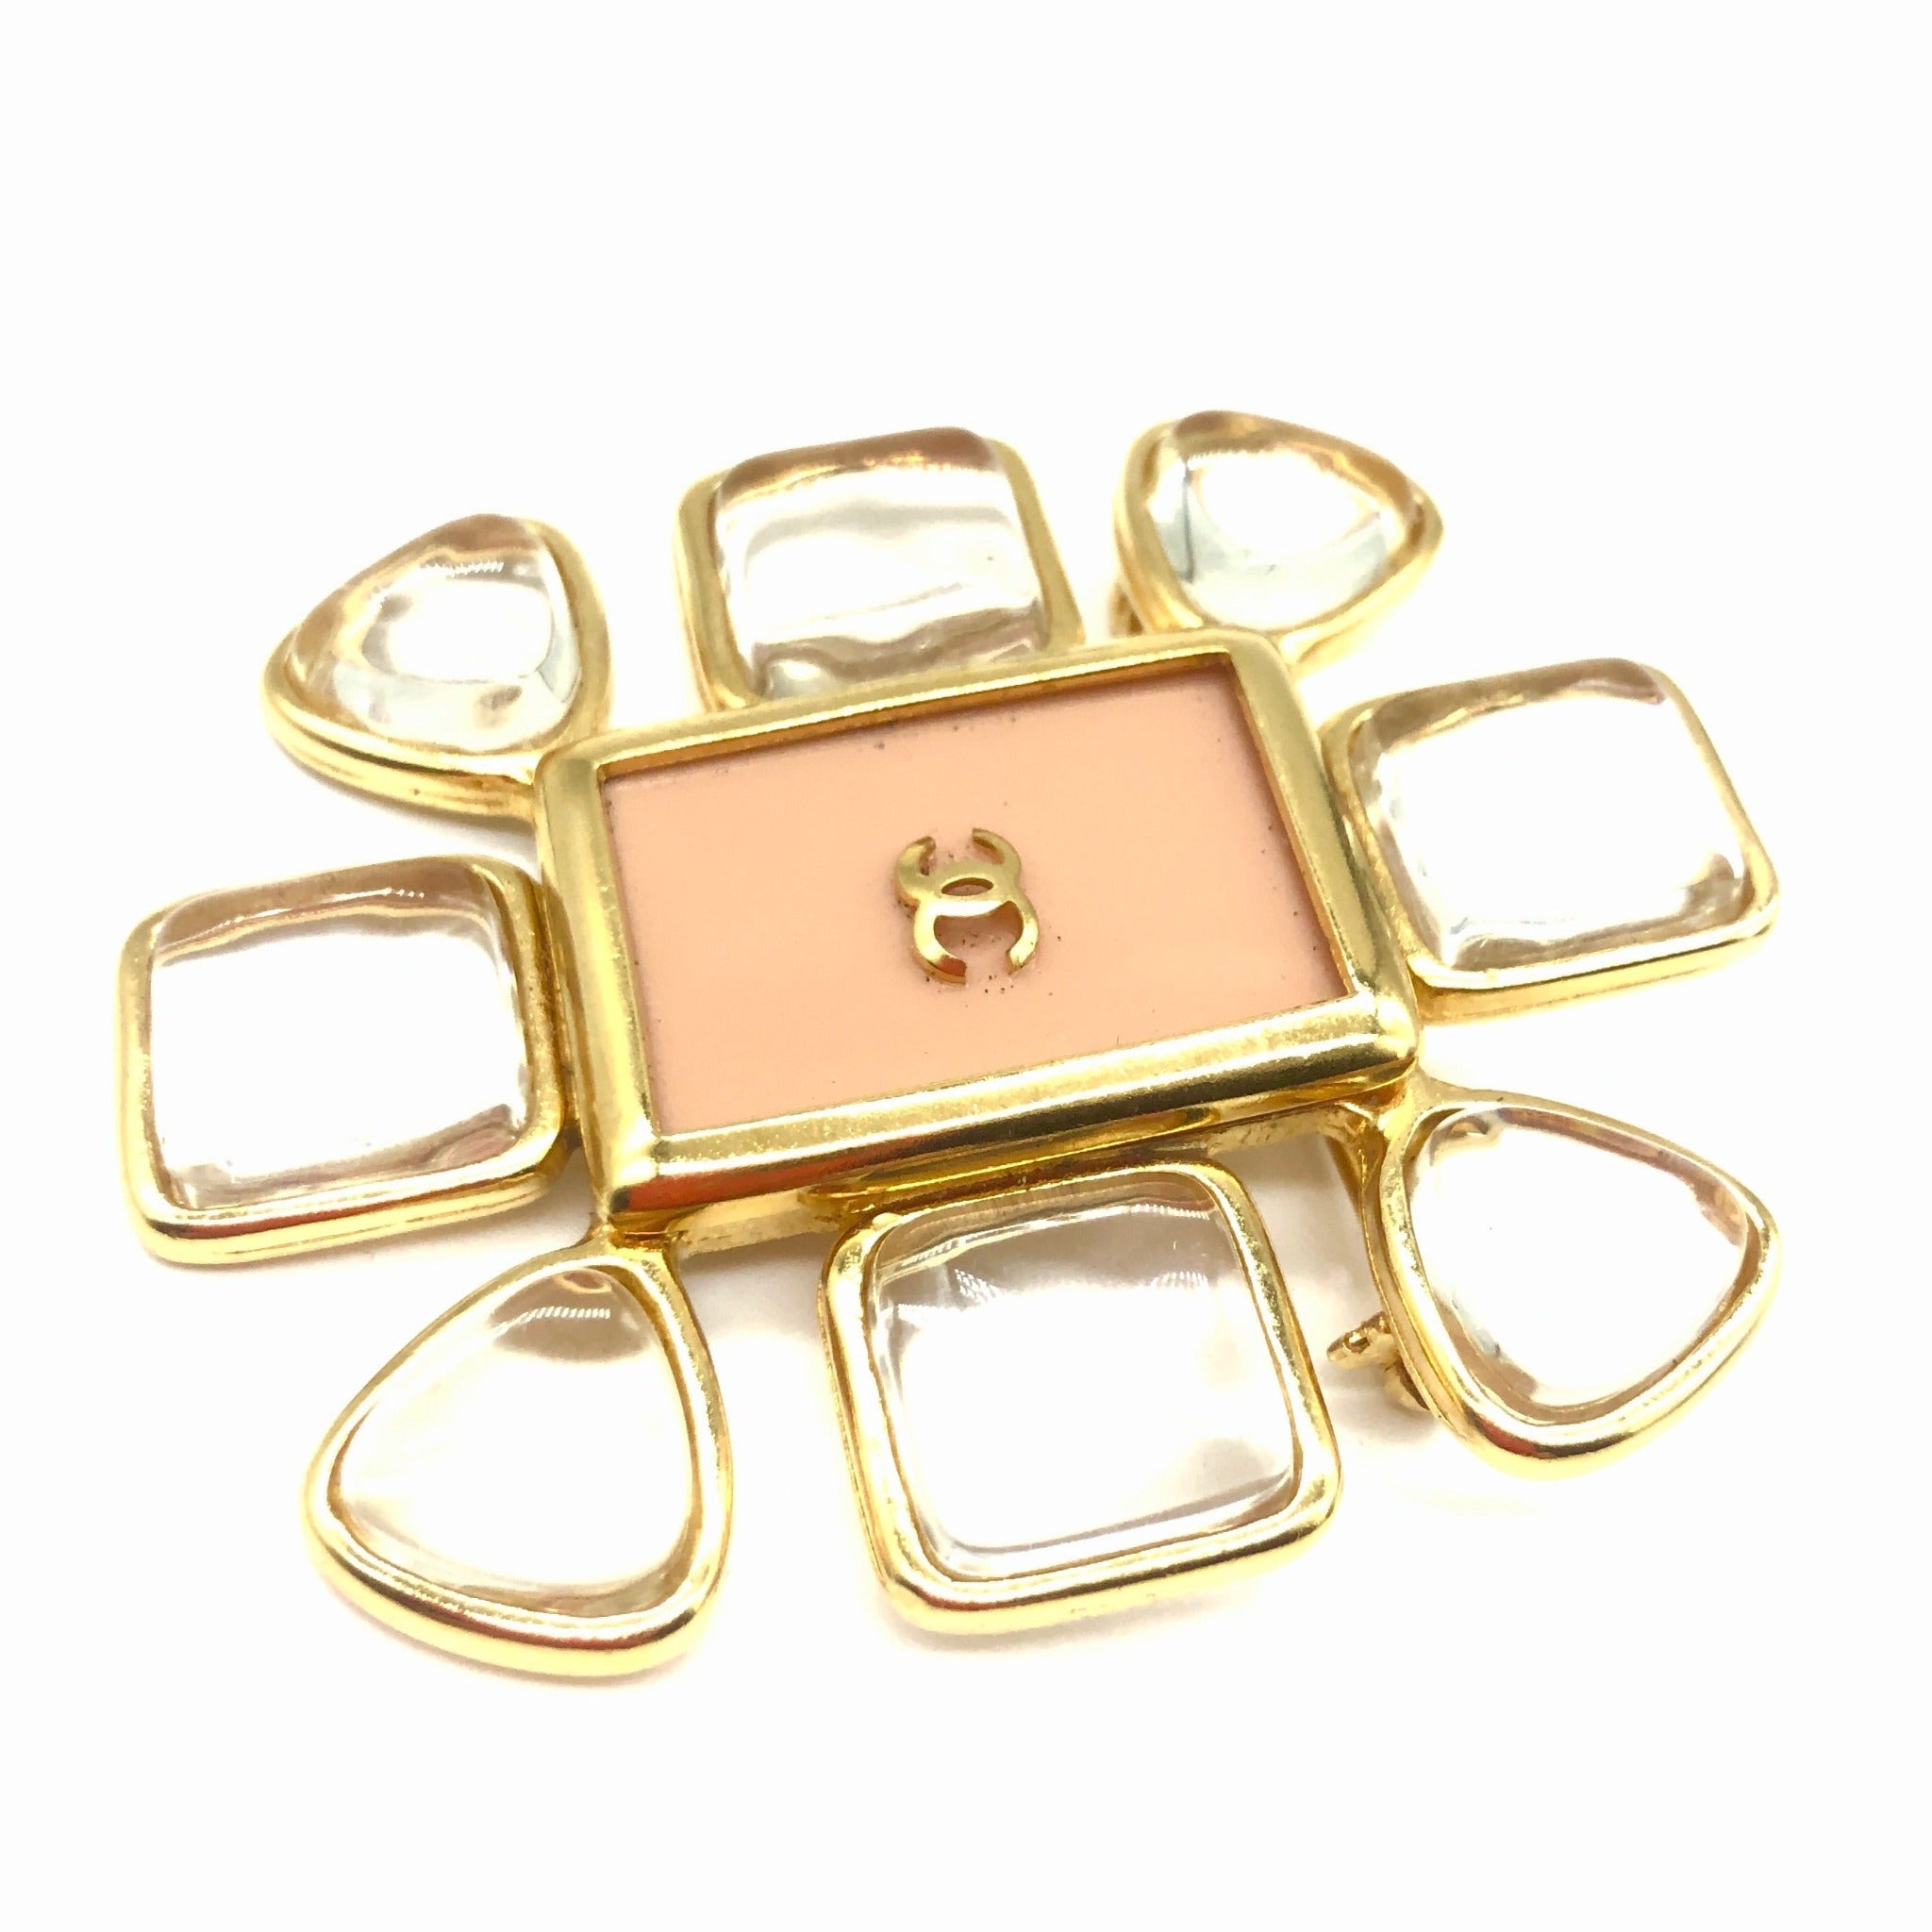 Chanel - Authenticated Pins - Metal Gold For Woman, Very Good Condition